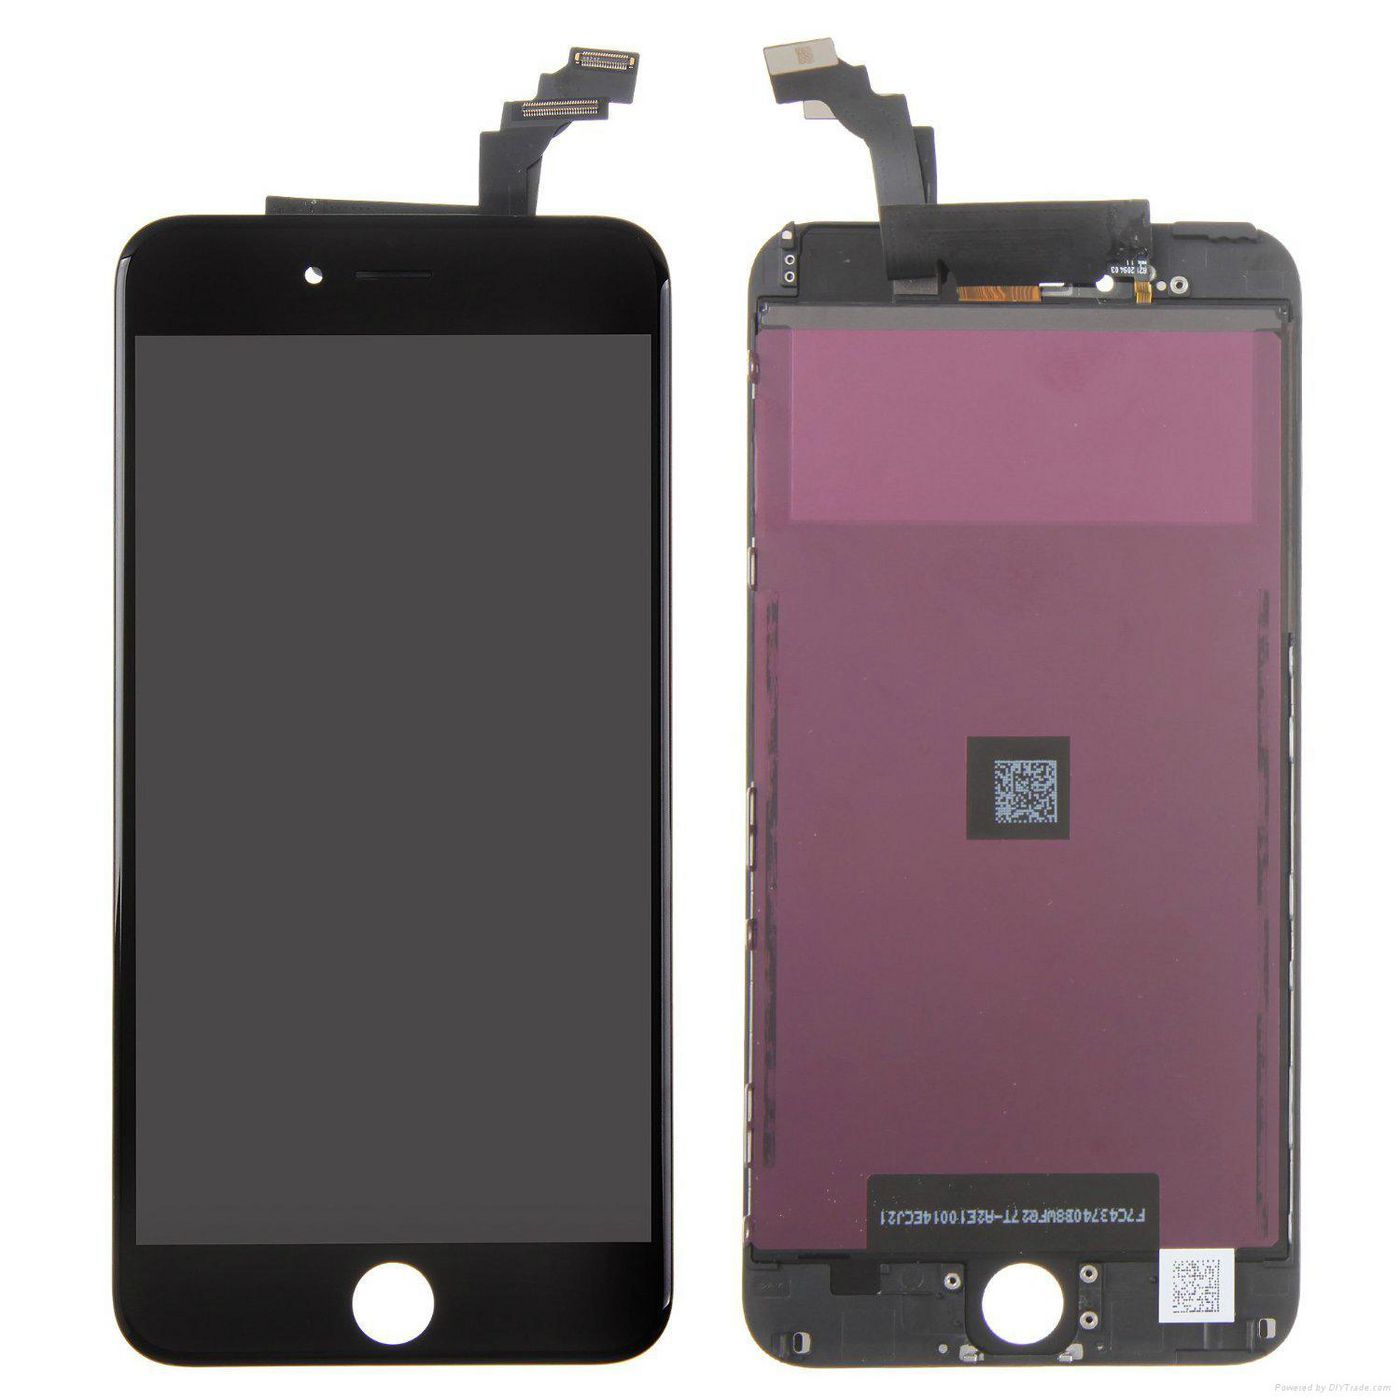 CoreParts LCD Screen for iPhone 6 Plus Black